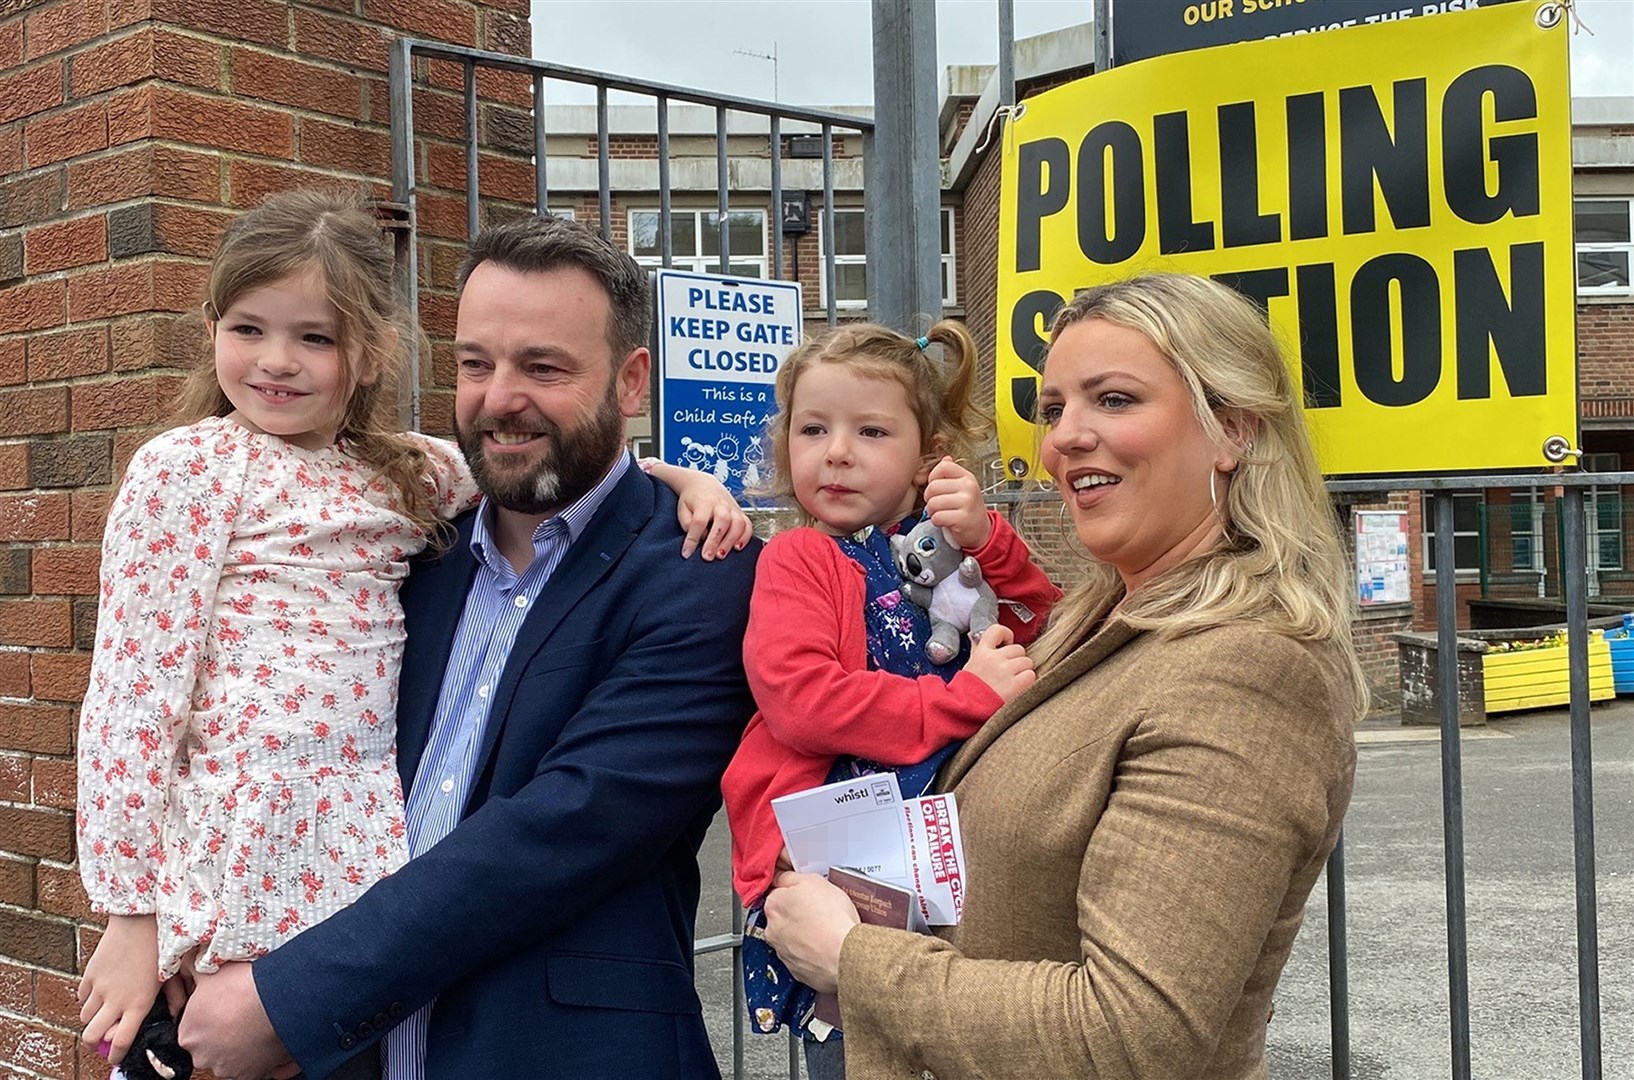 SDLP leader Colum Eastwood arrives to cast his vote with his wife and children in the Foyle constituency in Londonderry (PA)